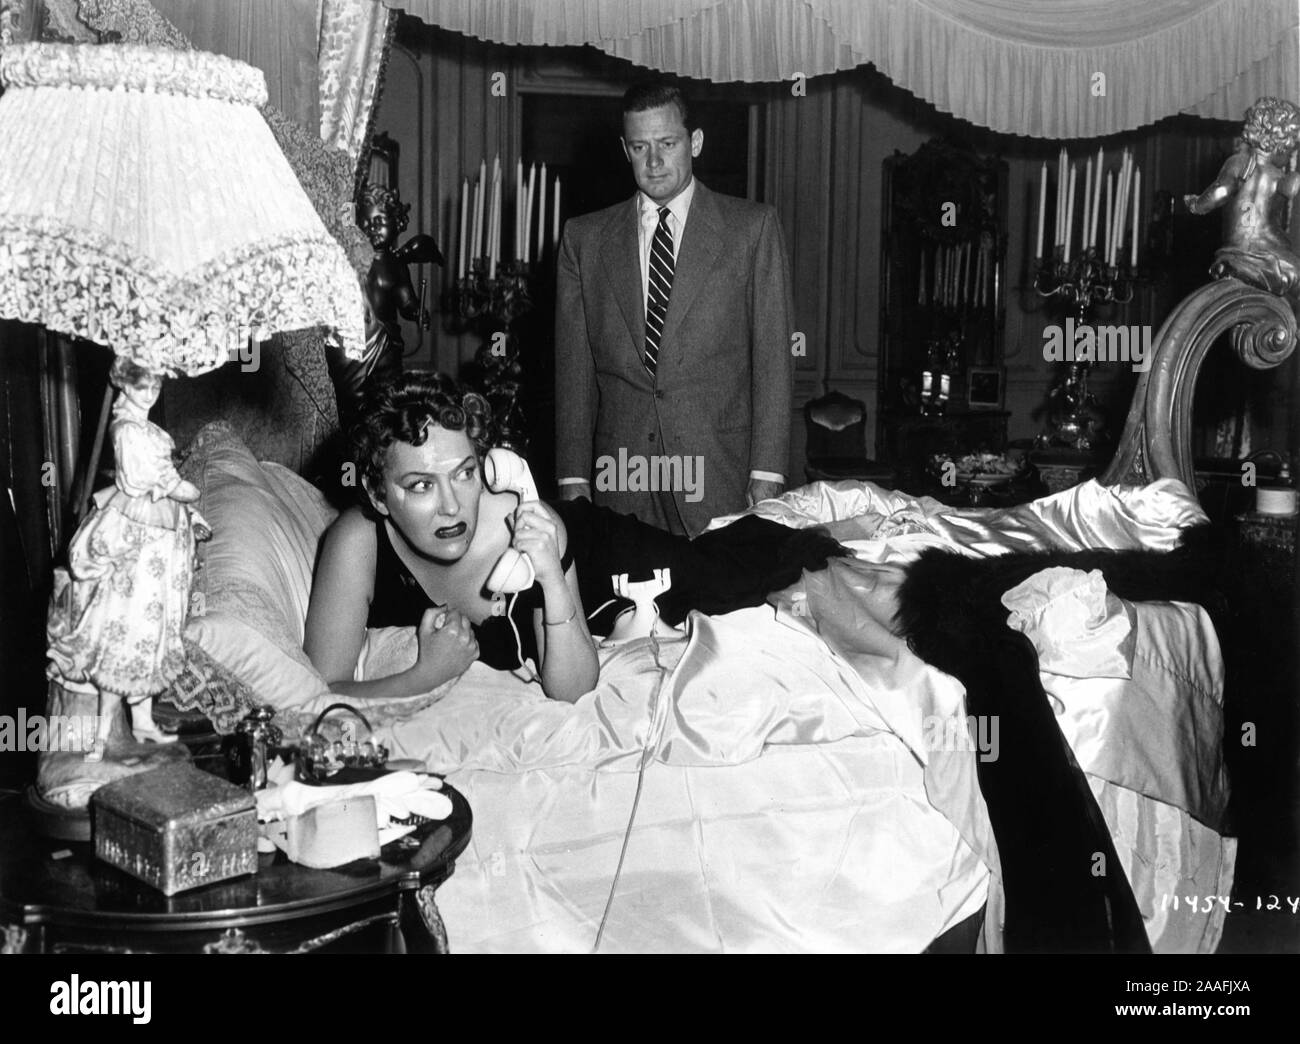 GLORIA SWANSON as Norma Desmond and WILLIAM HOLDEN as Joe Gillis in SUNSET BOULEVARD 1950 director BILLY WILDER writers CHARLES BRACKETT BILLY WILDER and D. M. MARSHMAN Jr Costume design EDITH HEAD Paramount Pictures Stock Photo